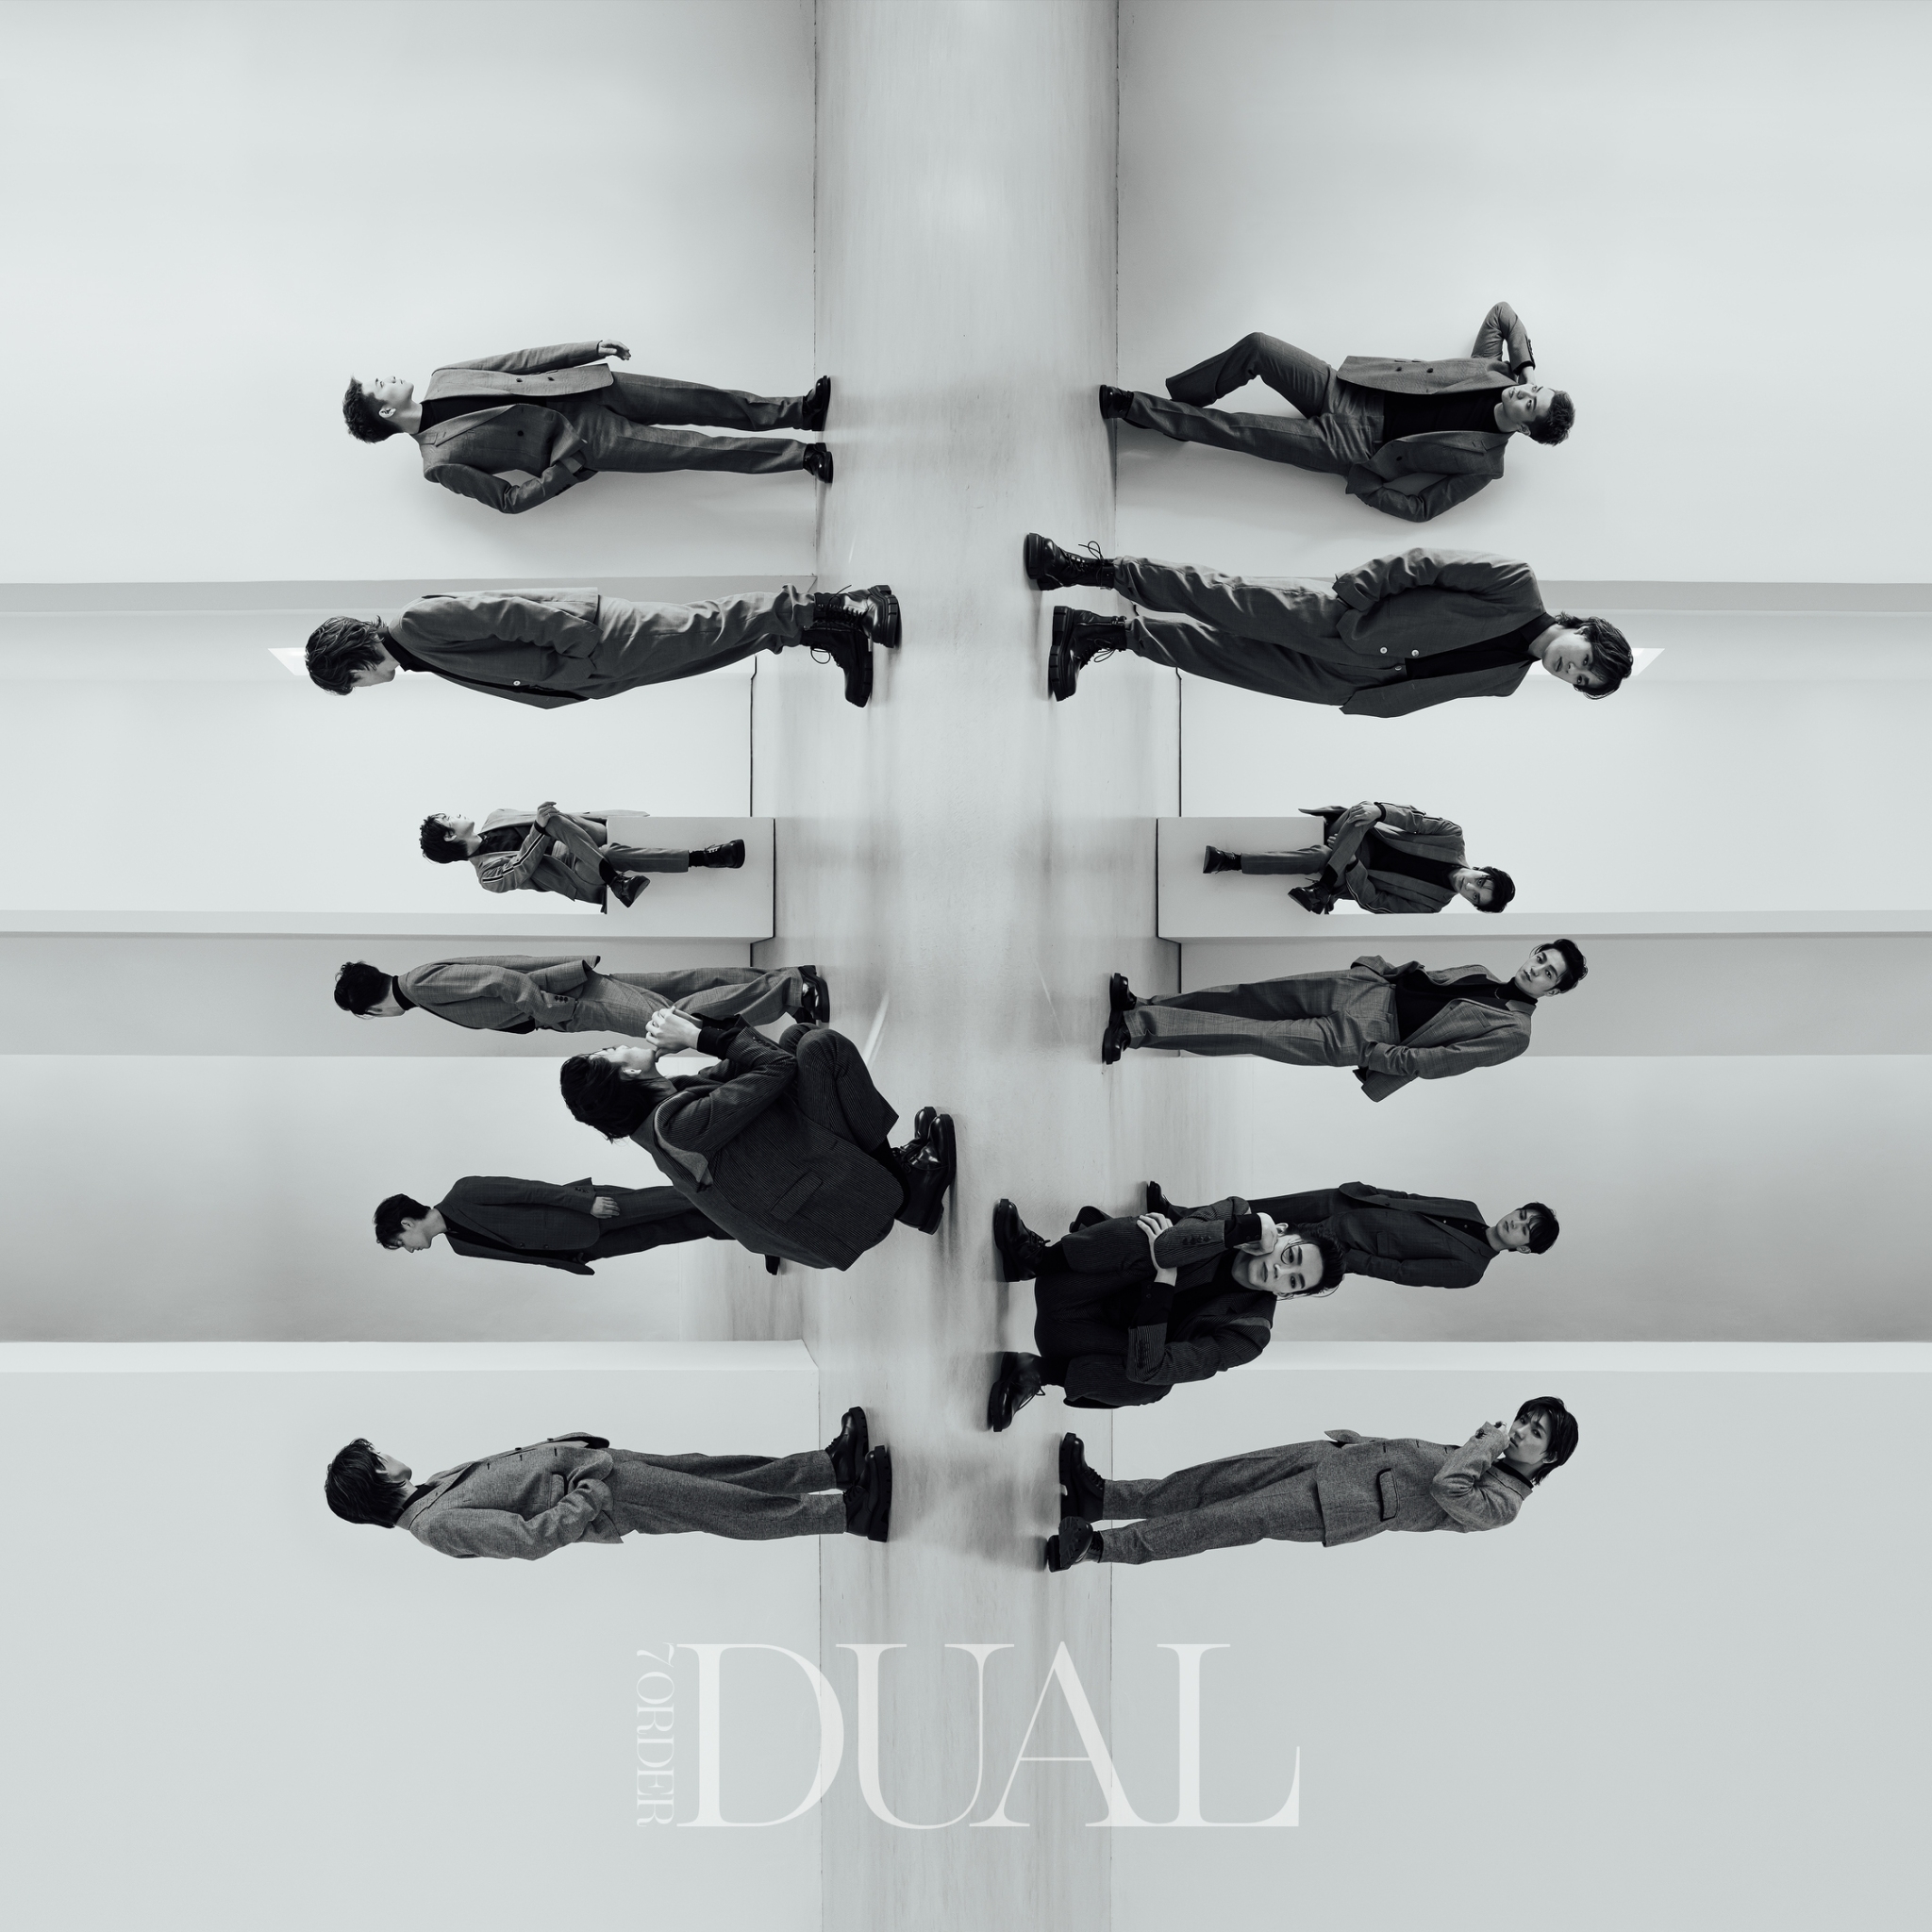 DUAL | 7ORDER project Official Site